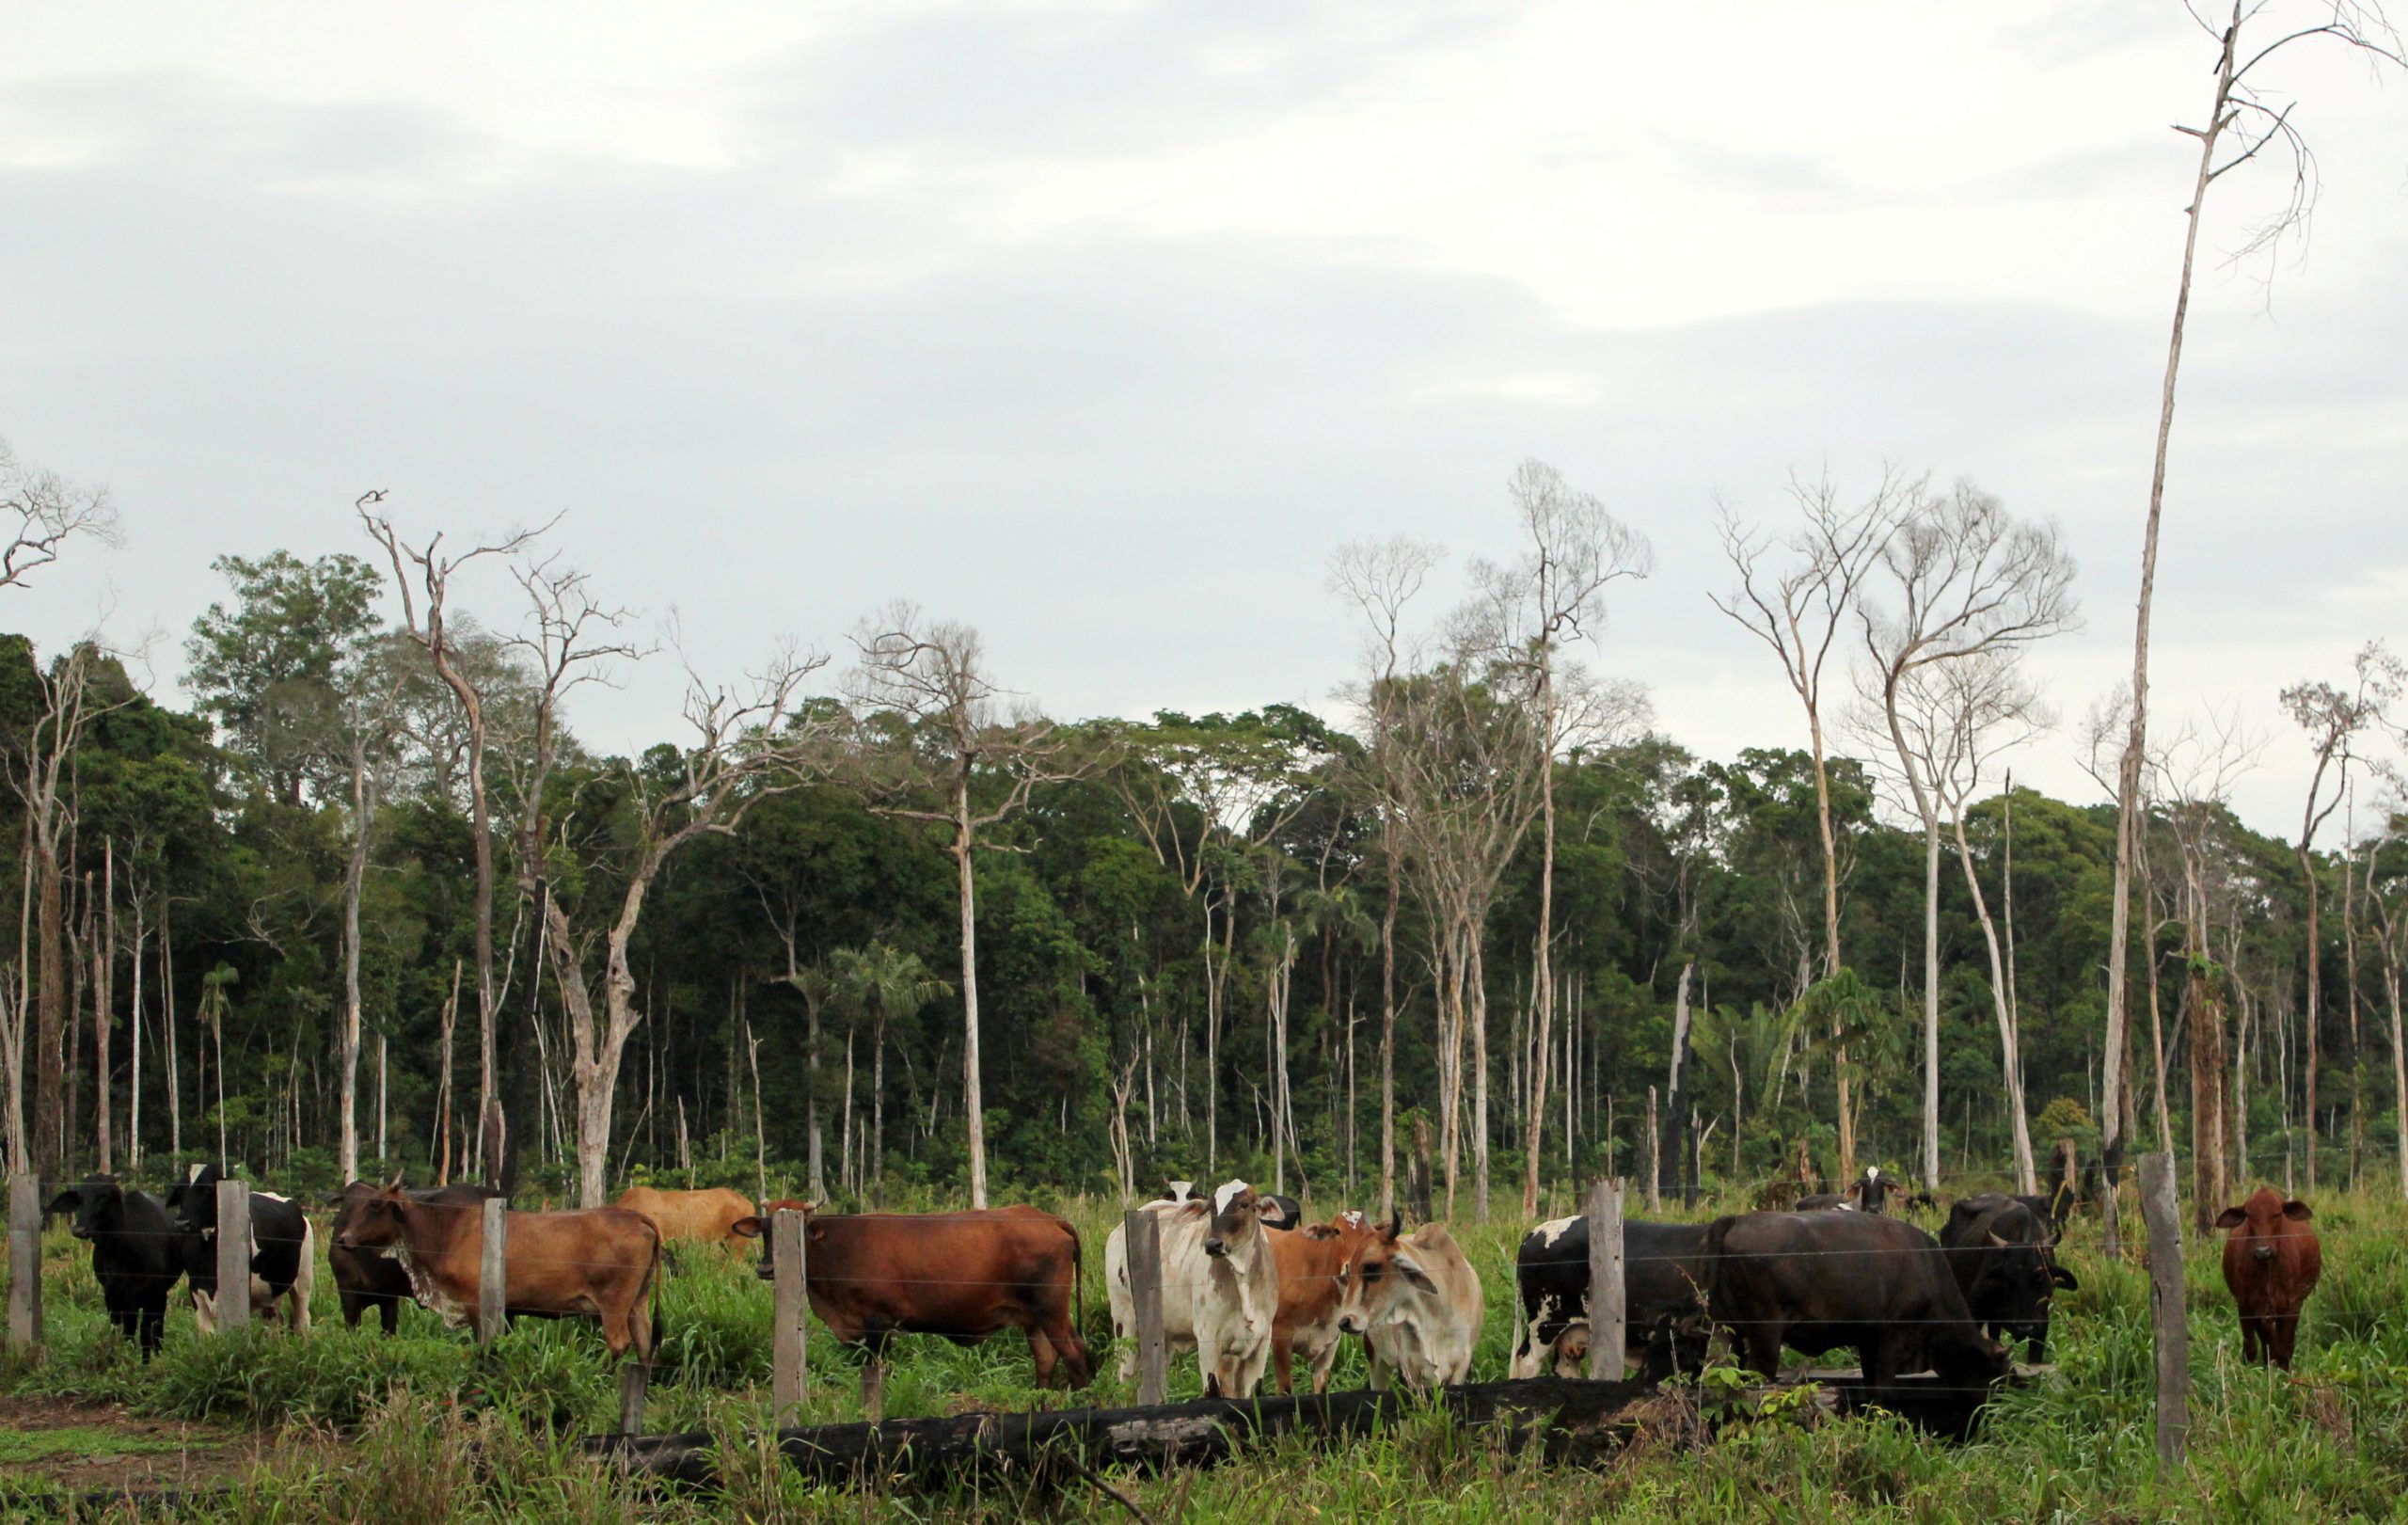 Cows graze in a deforested pasture in Brazil's Amazon located in the the municipality of Itapua do Oeste, Rondonia state, Brazil, November 3, 2020. Picture taken November 3, 2020. REUTERS/Jake Spring - RC2O5L95EJ9H